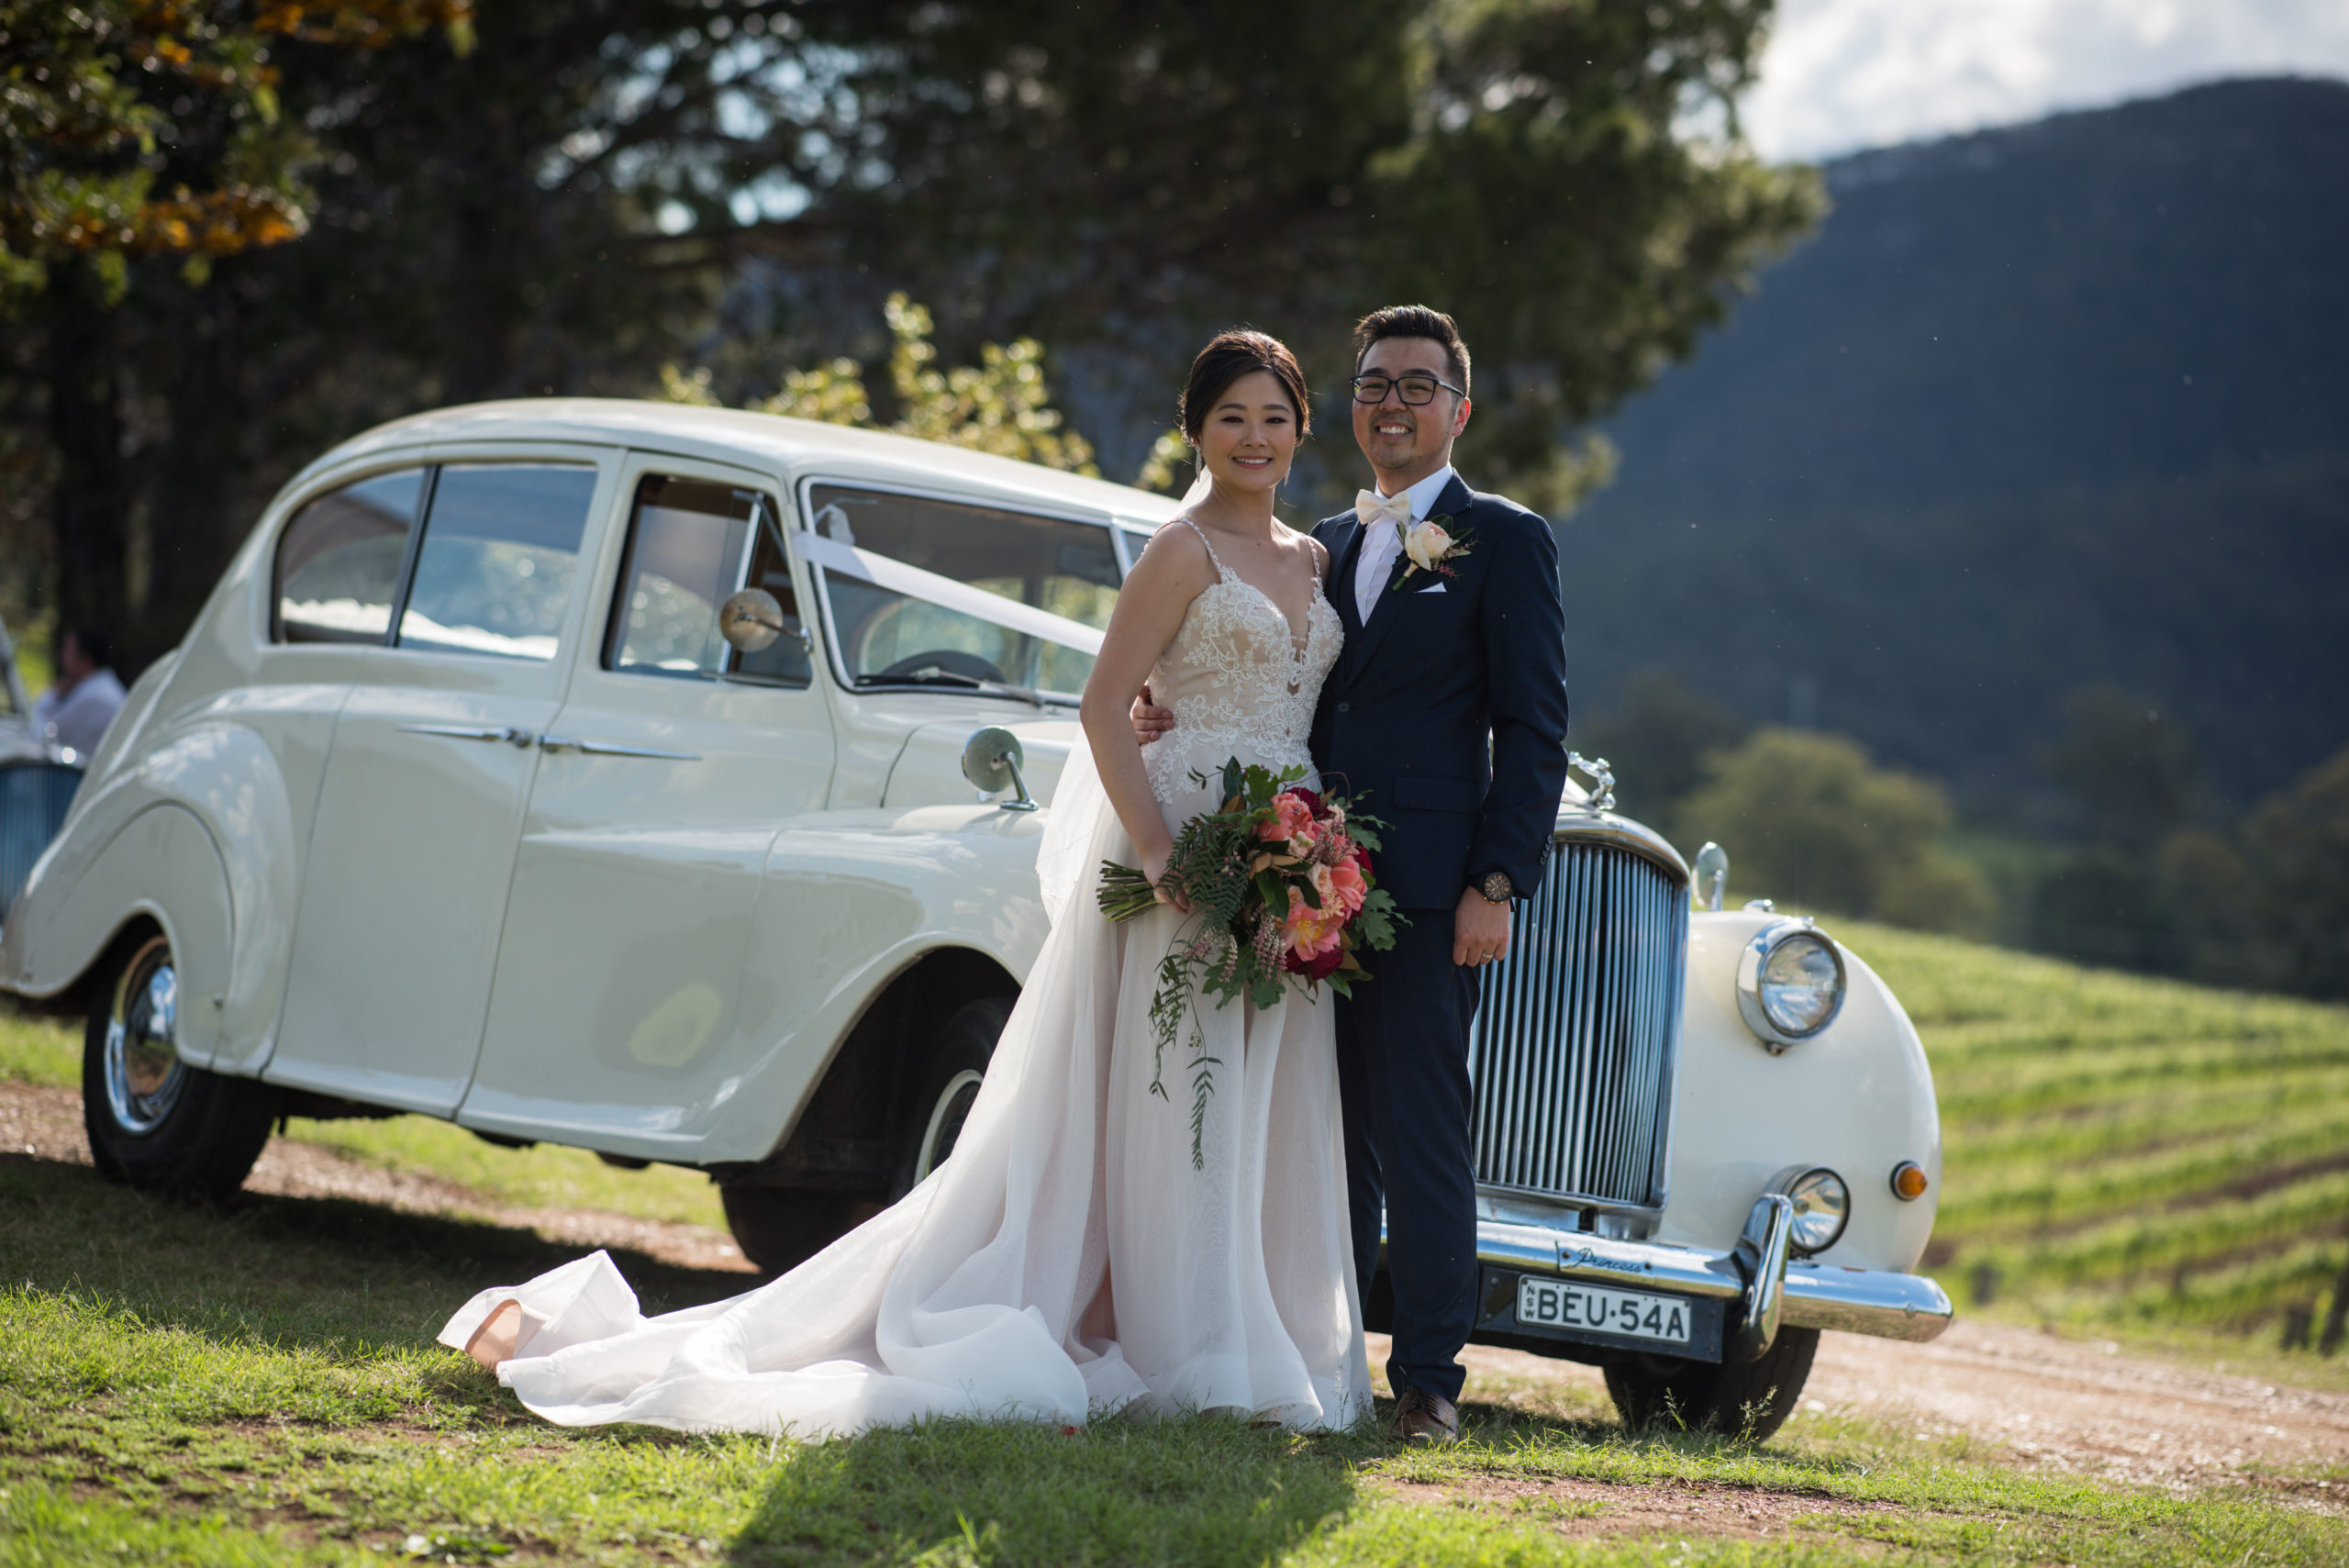 Bride and groom posing in front of a vintage car at Ben Ean Winery wedding